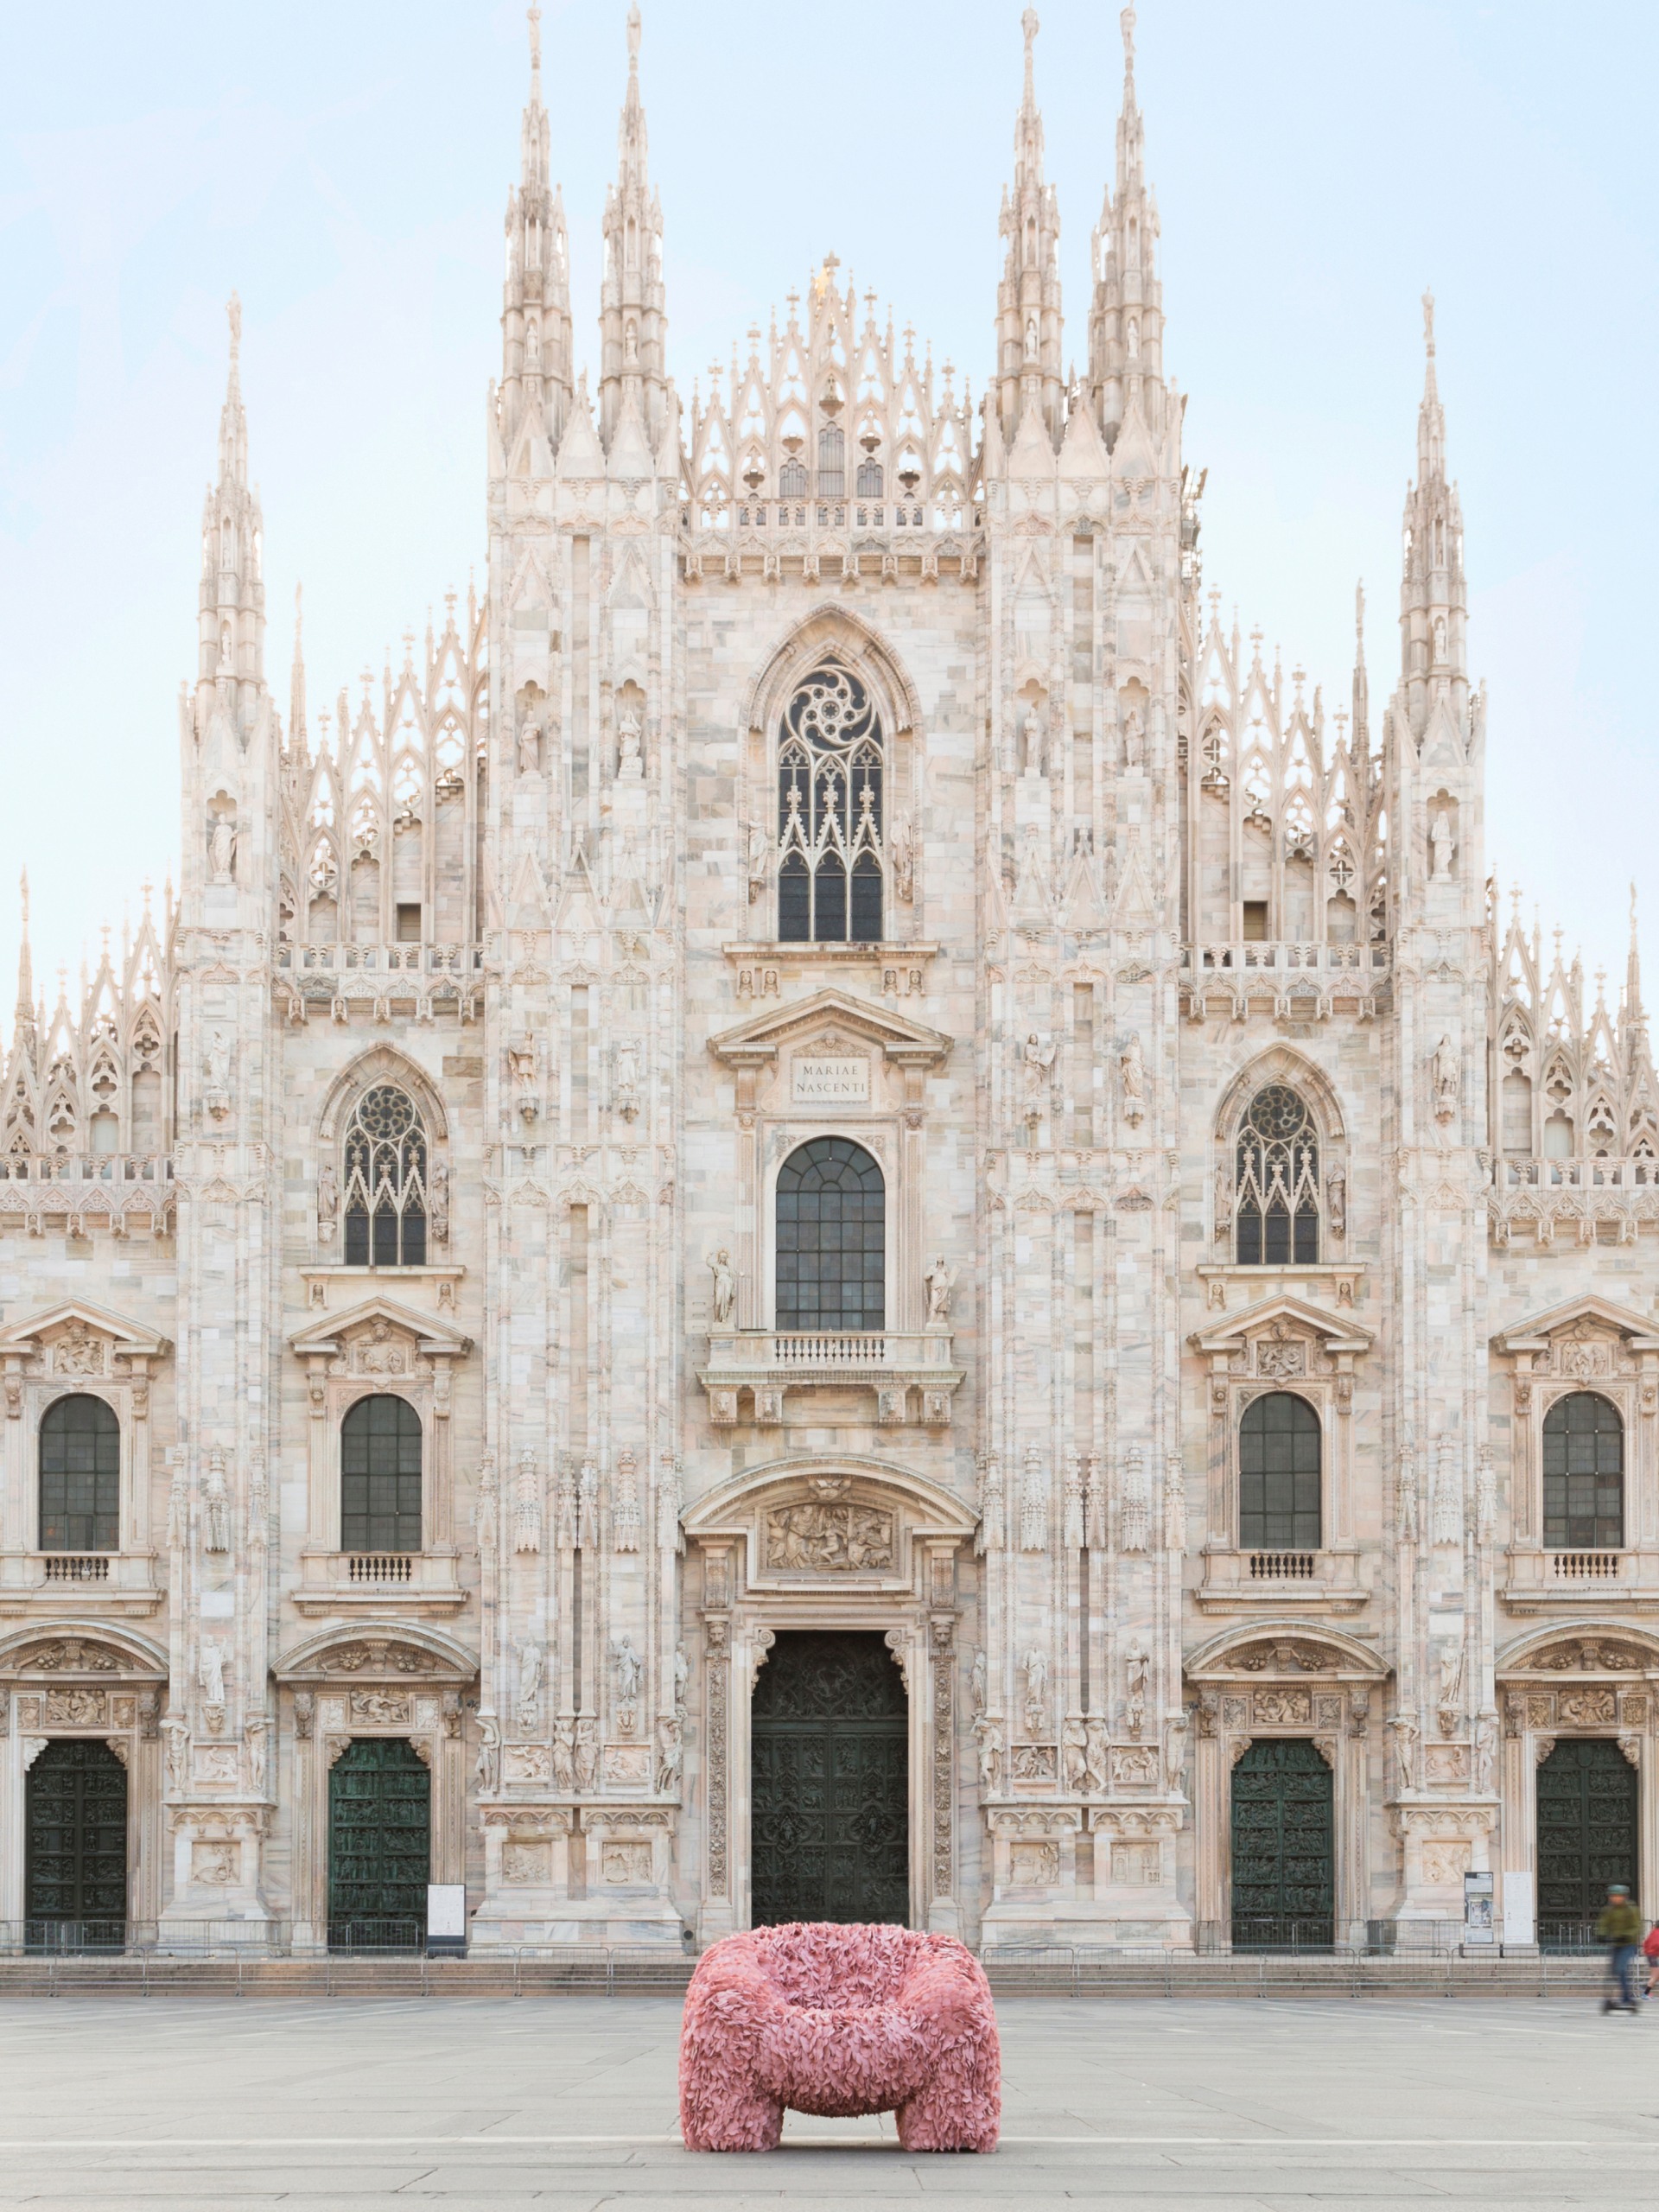 The “Hortensia Chair” stands on the forecourt of Milan Cathedral.